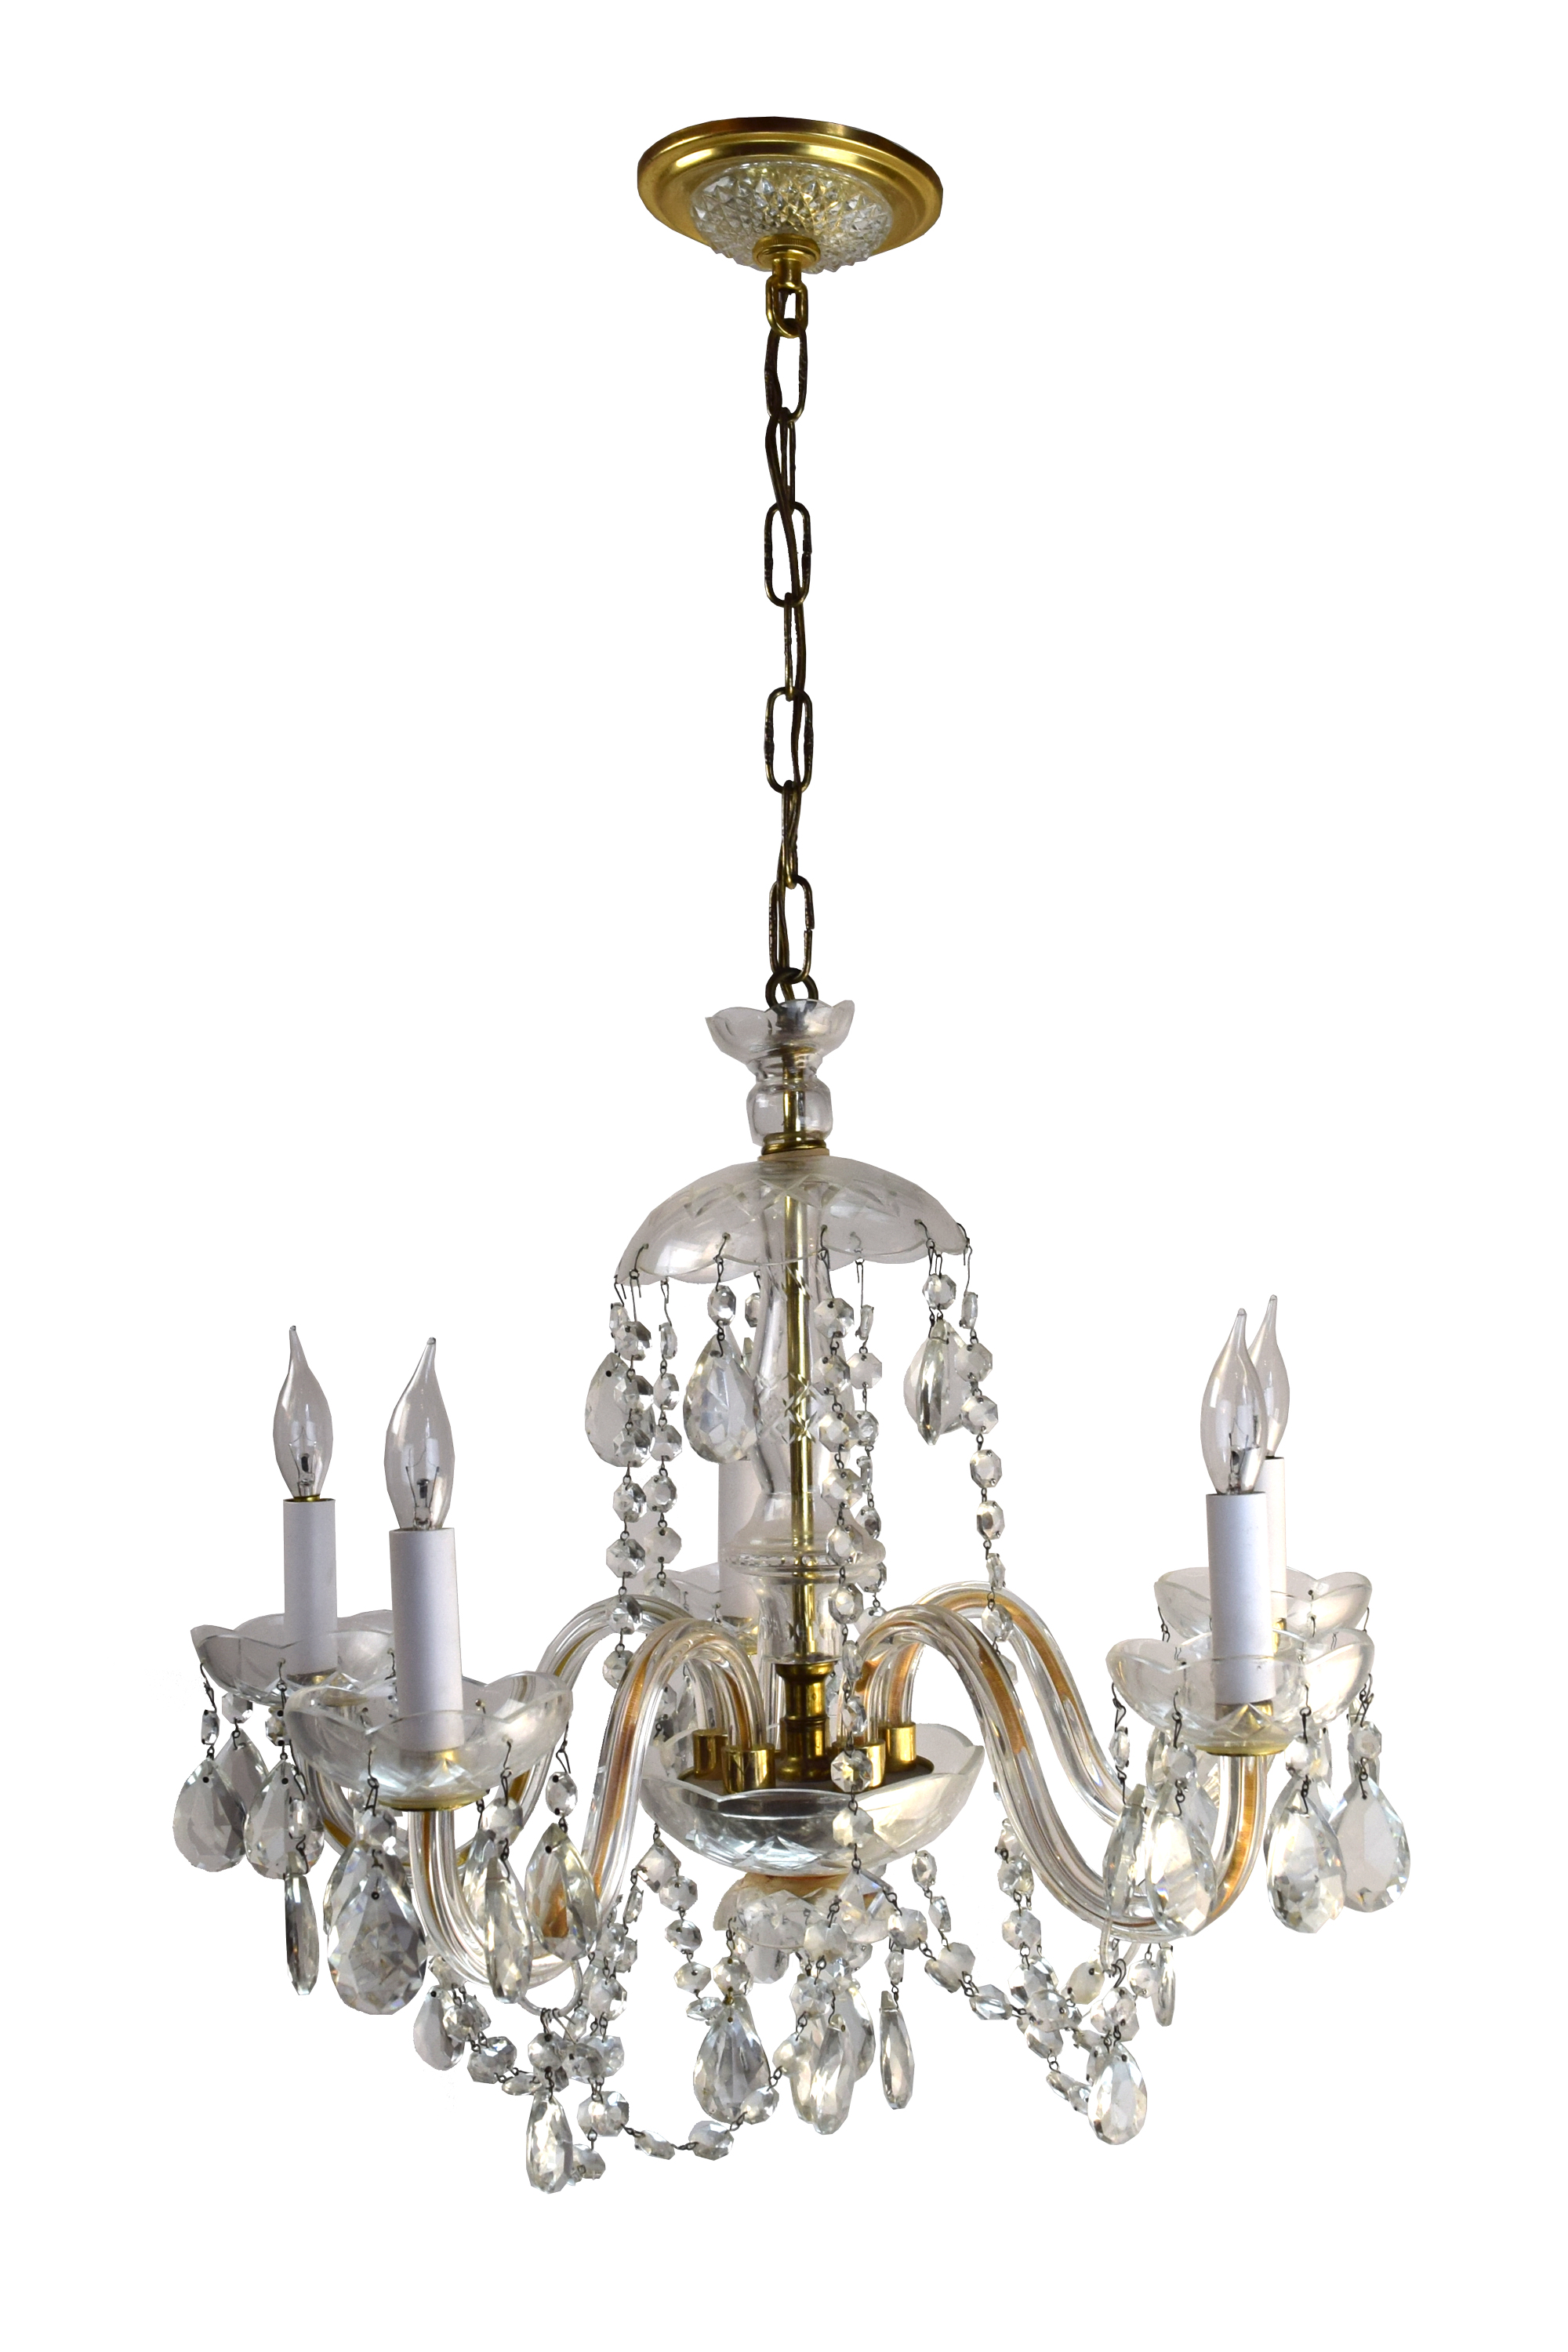 5 Candle Crystal Chandelier, Crystal Candle Chandelier Standard Sizes